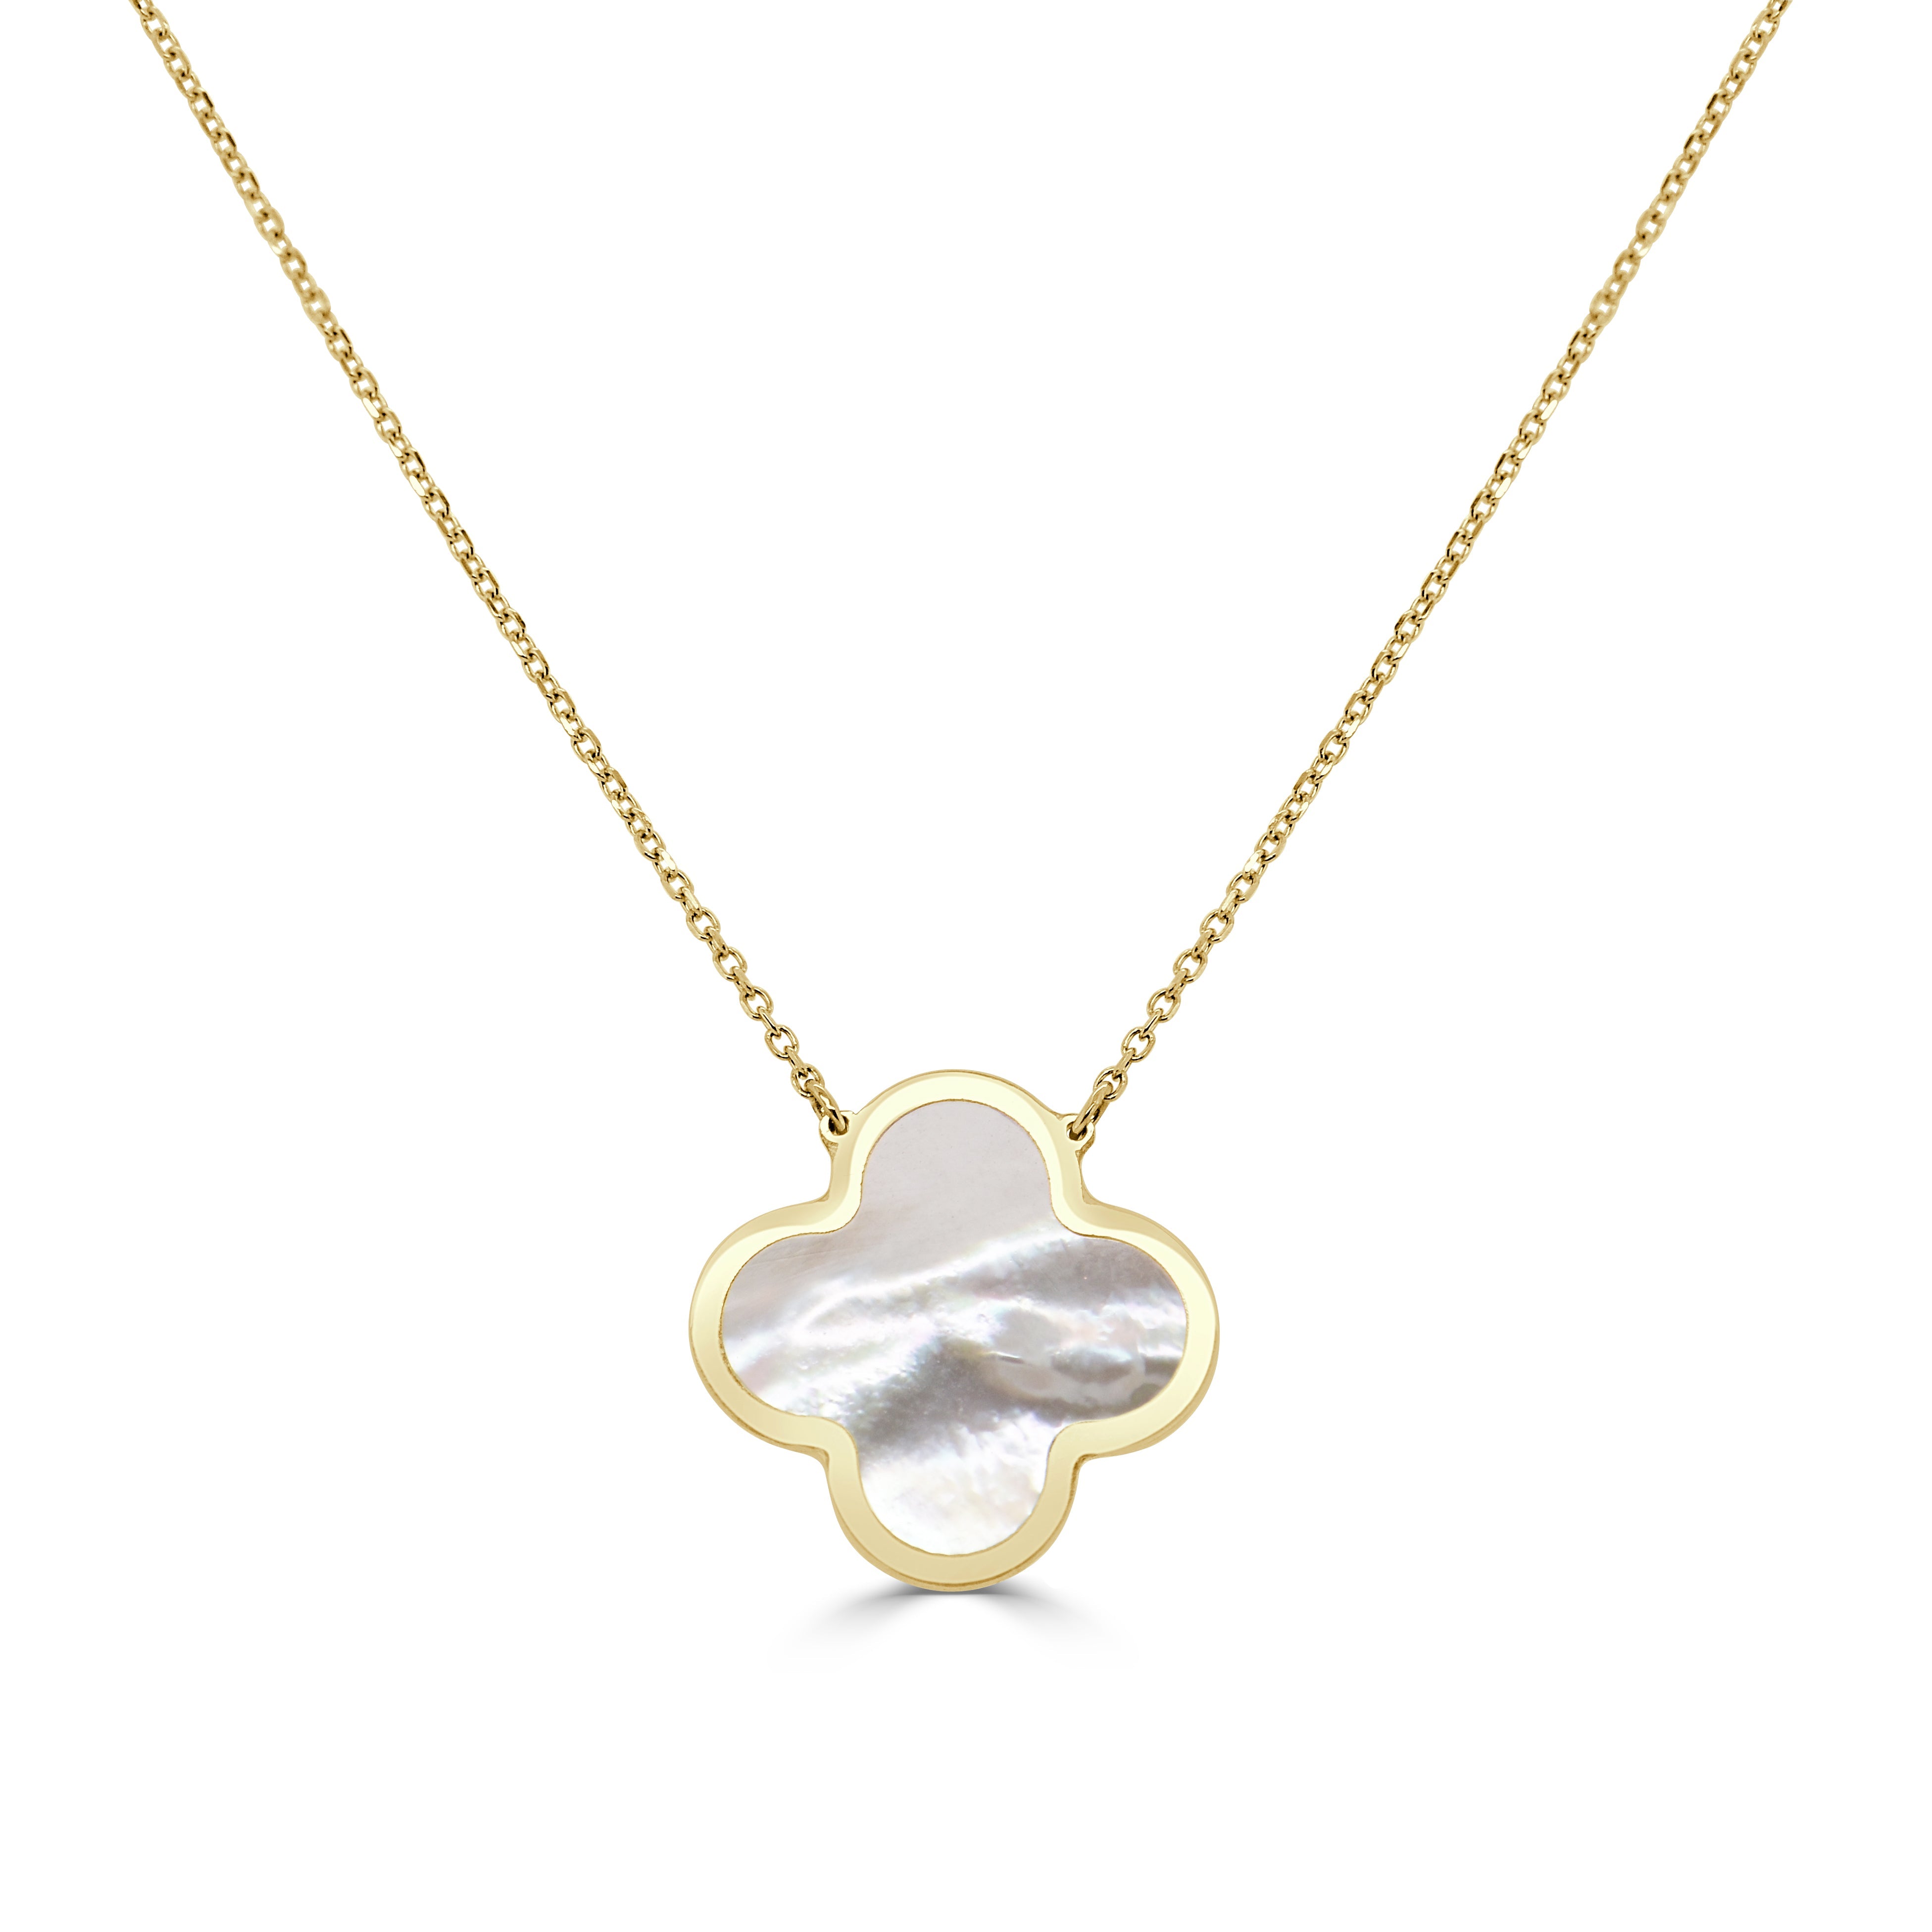 14K Yellow Gold & Mother of Pearl Clover Necklace